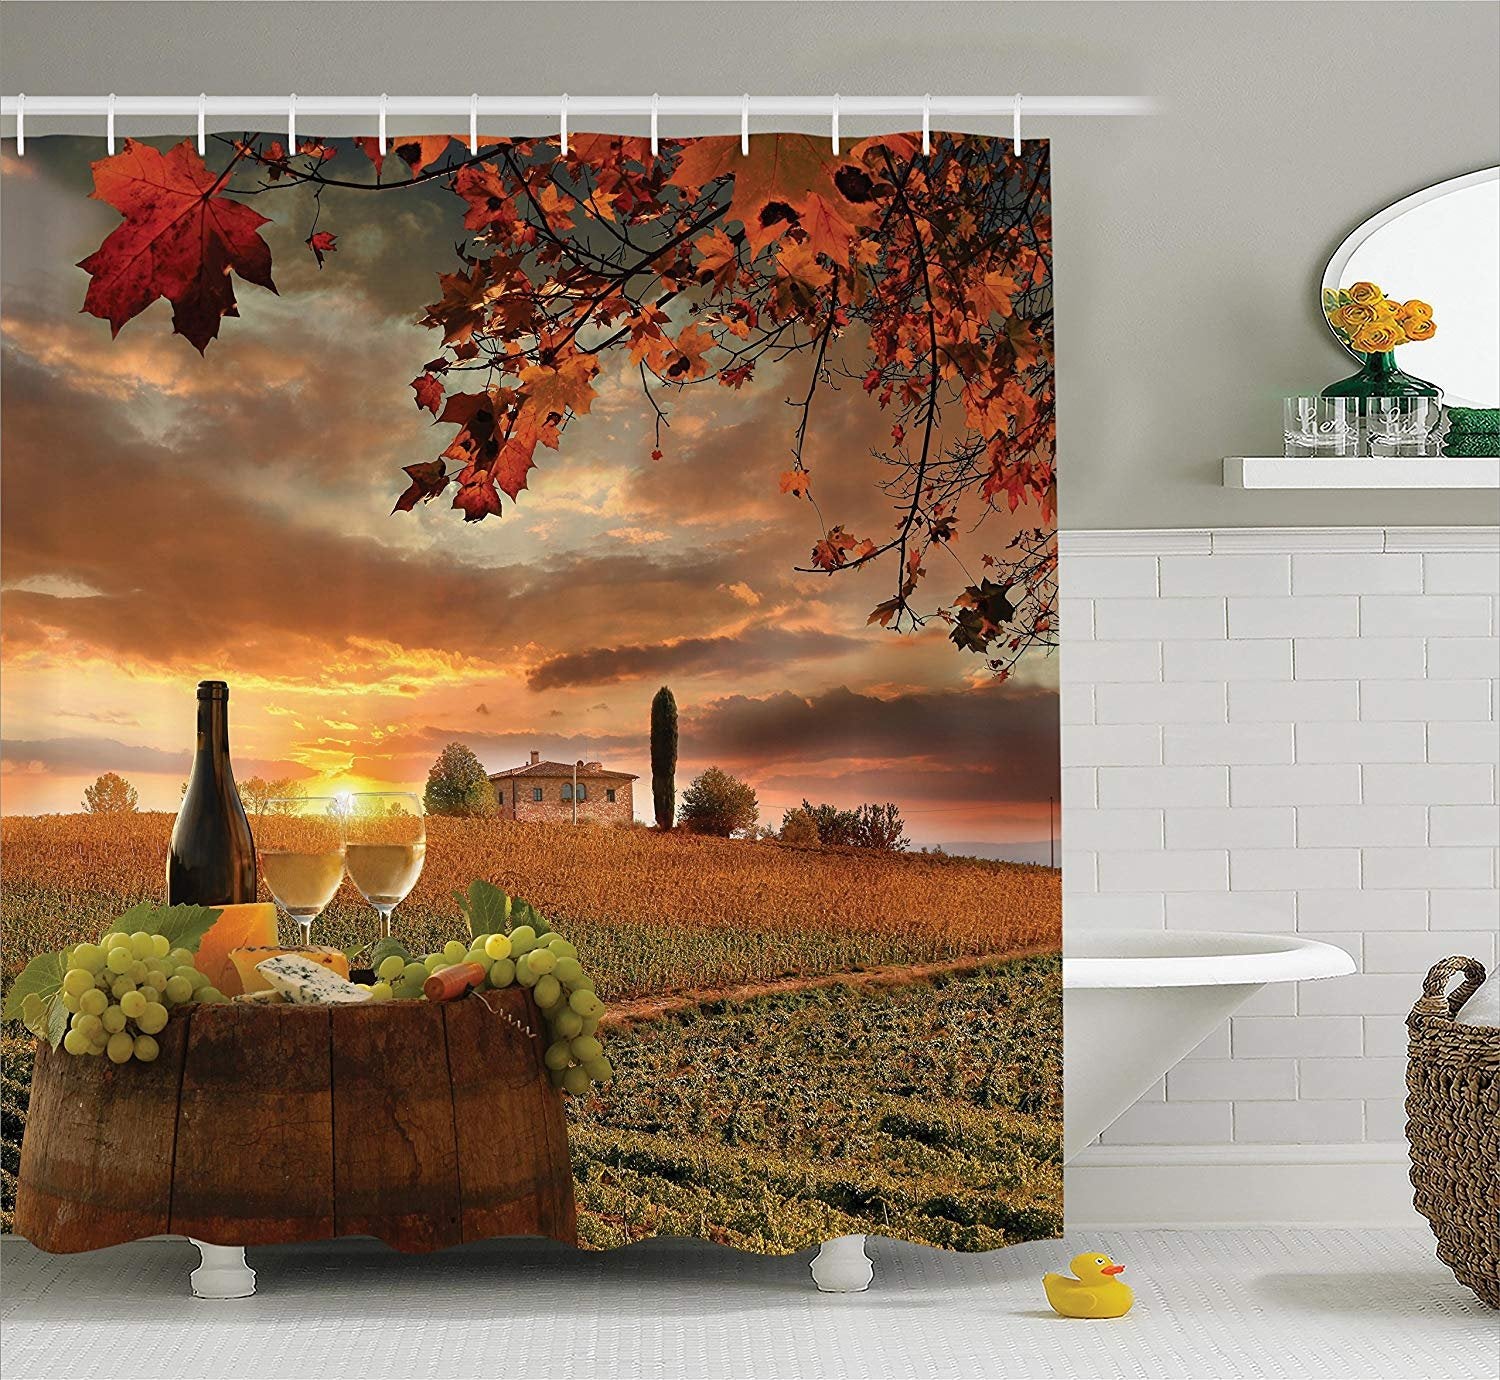 Ambesonne Winery Decor Collection, White Wine with Barrel on Vineyard at Sunset in Chianti Tuscany Italy Landscape Print, Polyester Fabric Bathroom Shower Curtain Set with Hooks, Orange Green